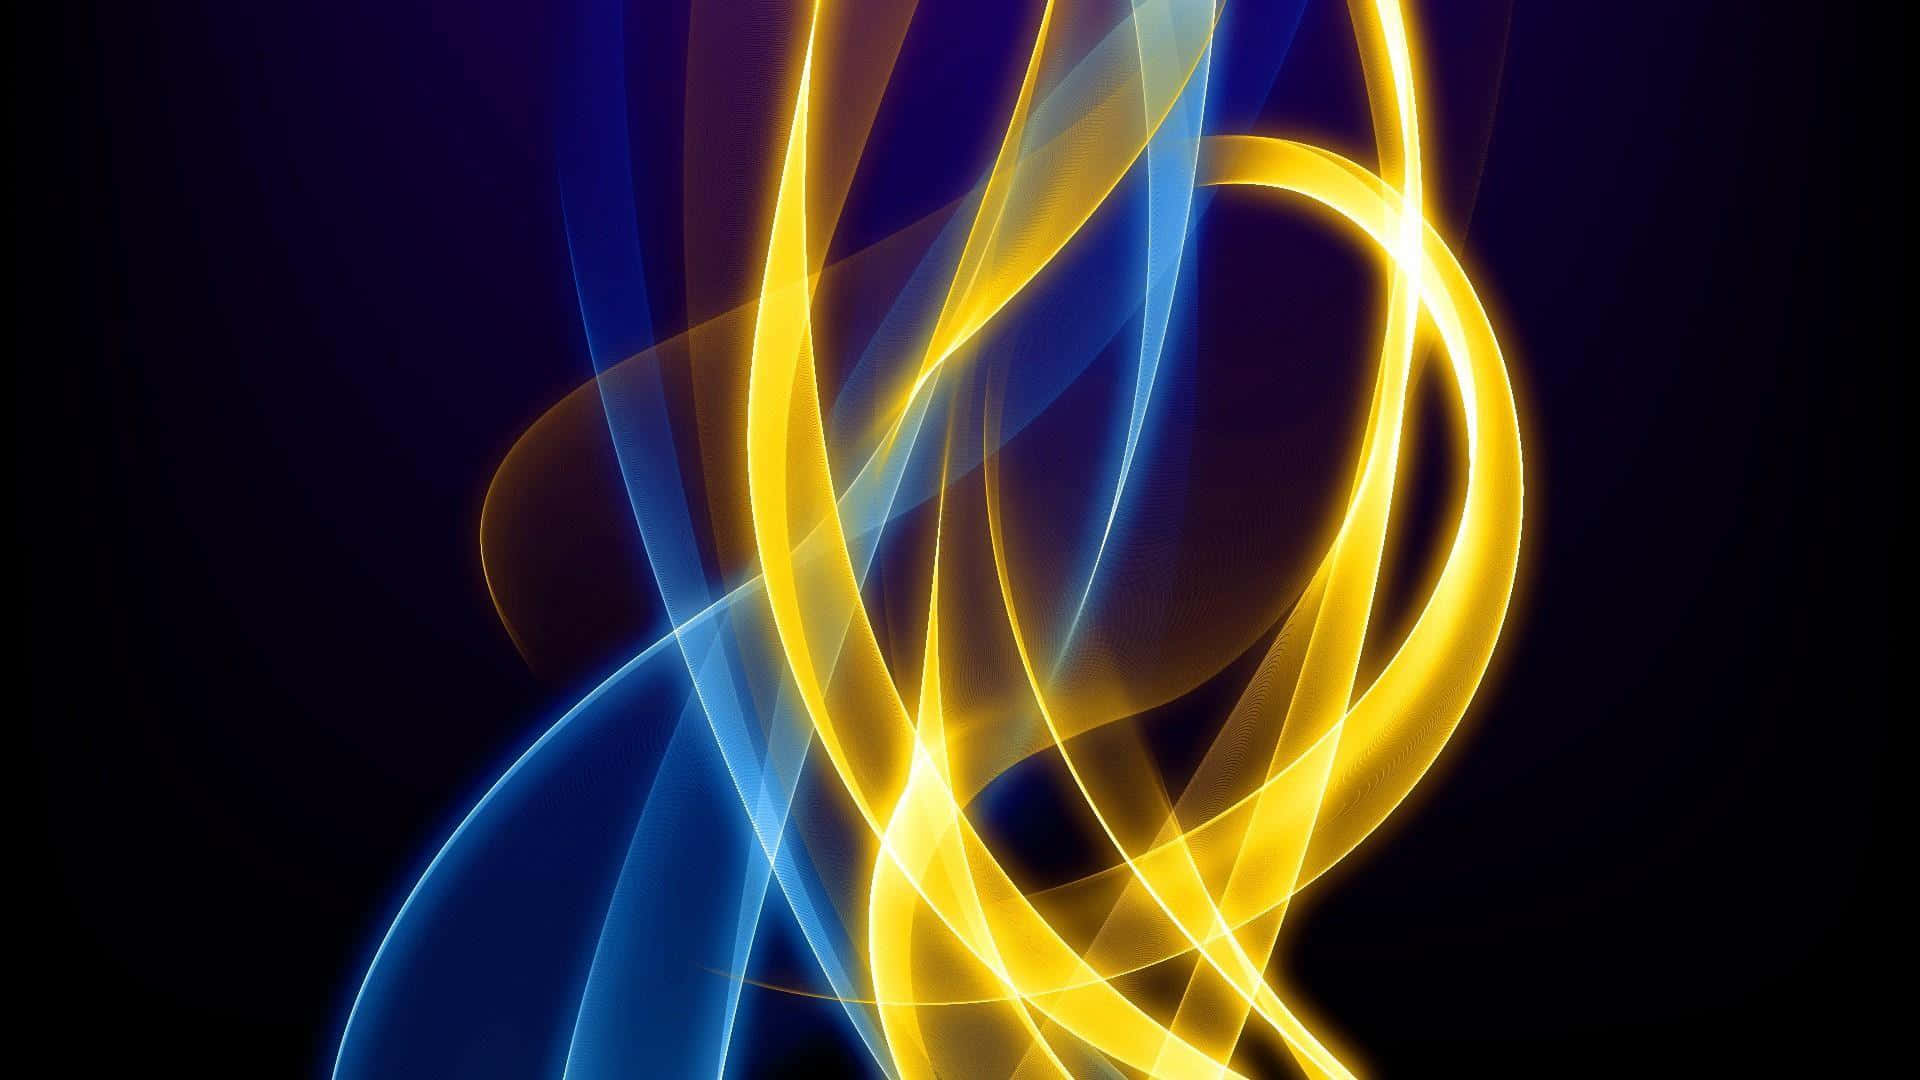 royal blue and gold backgrounds